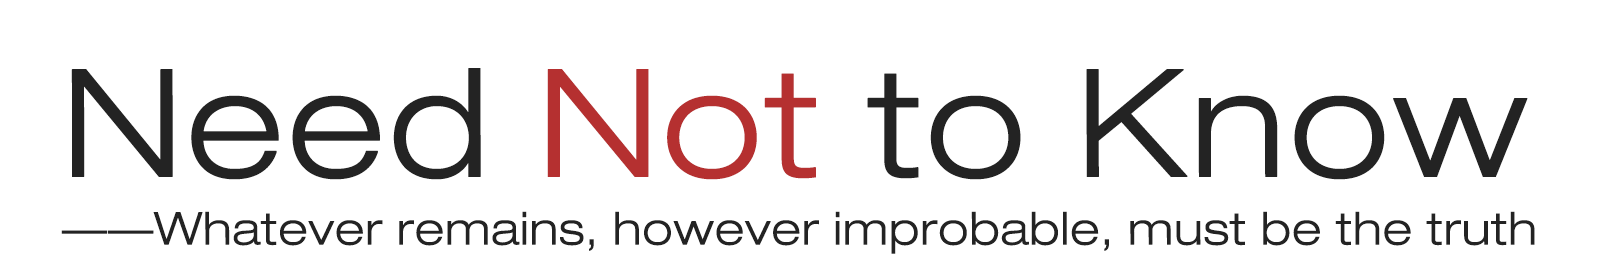 Need Not to Know logo